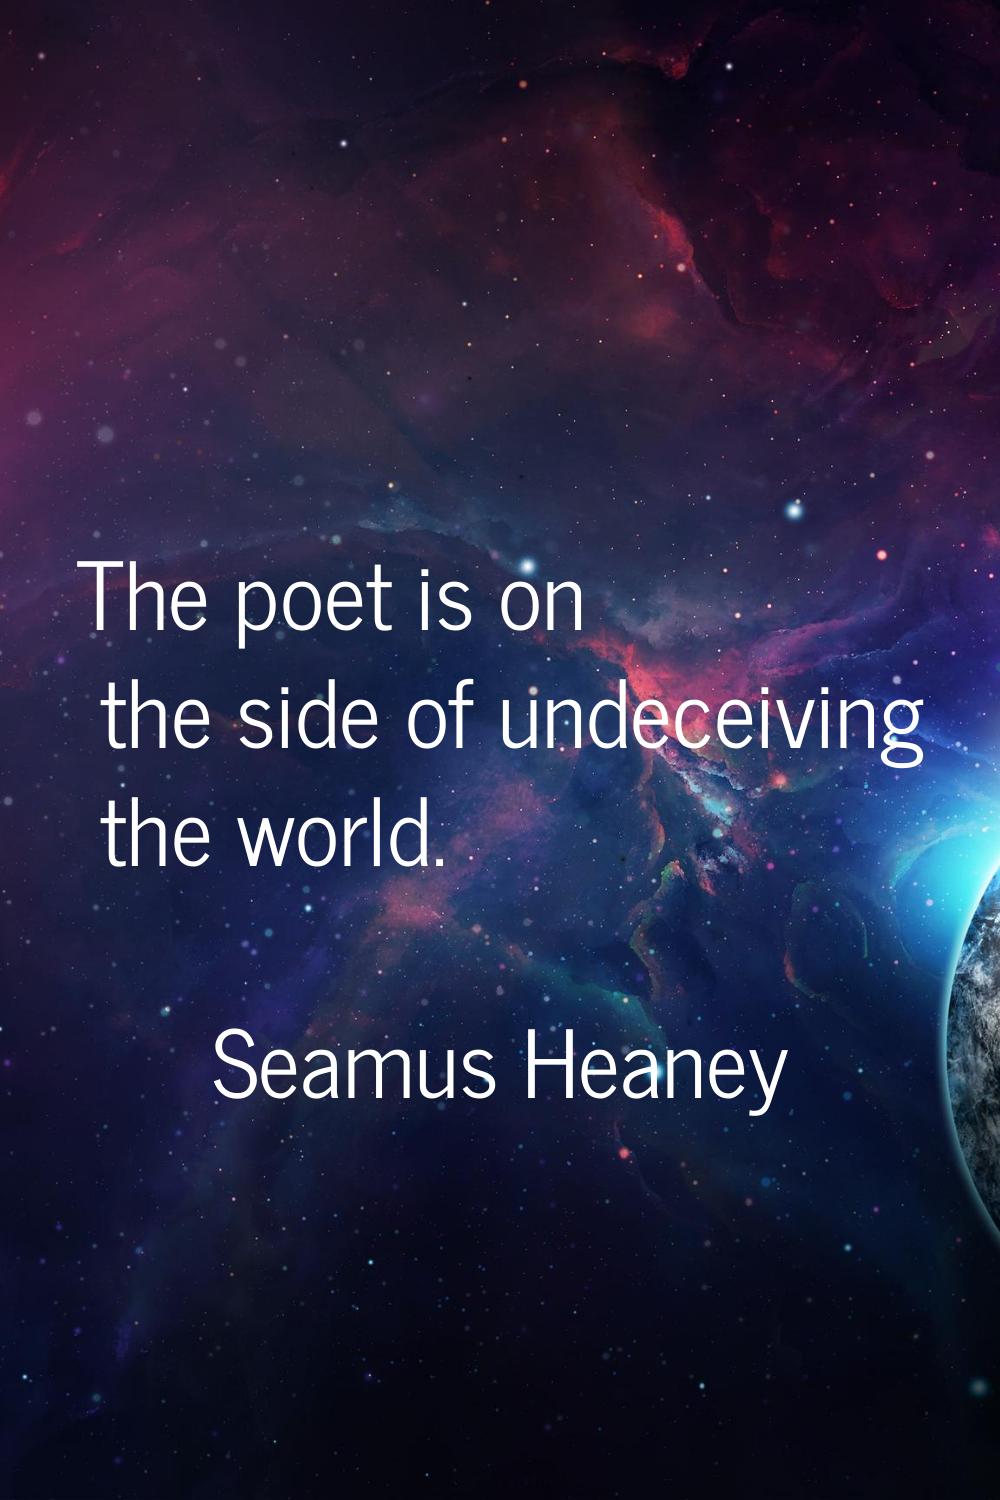 The poet is on the side of undeceiving the world.